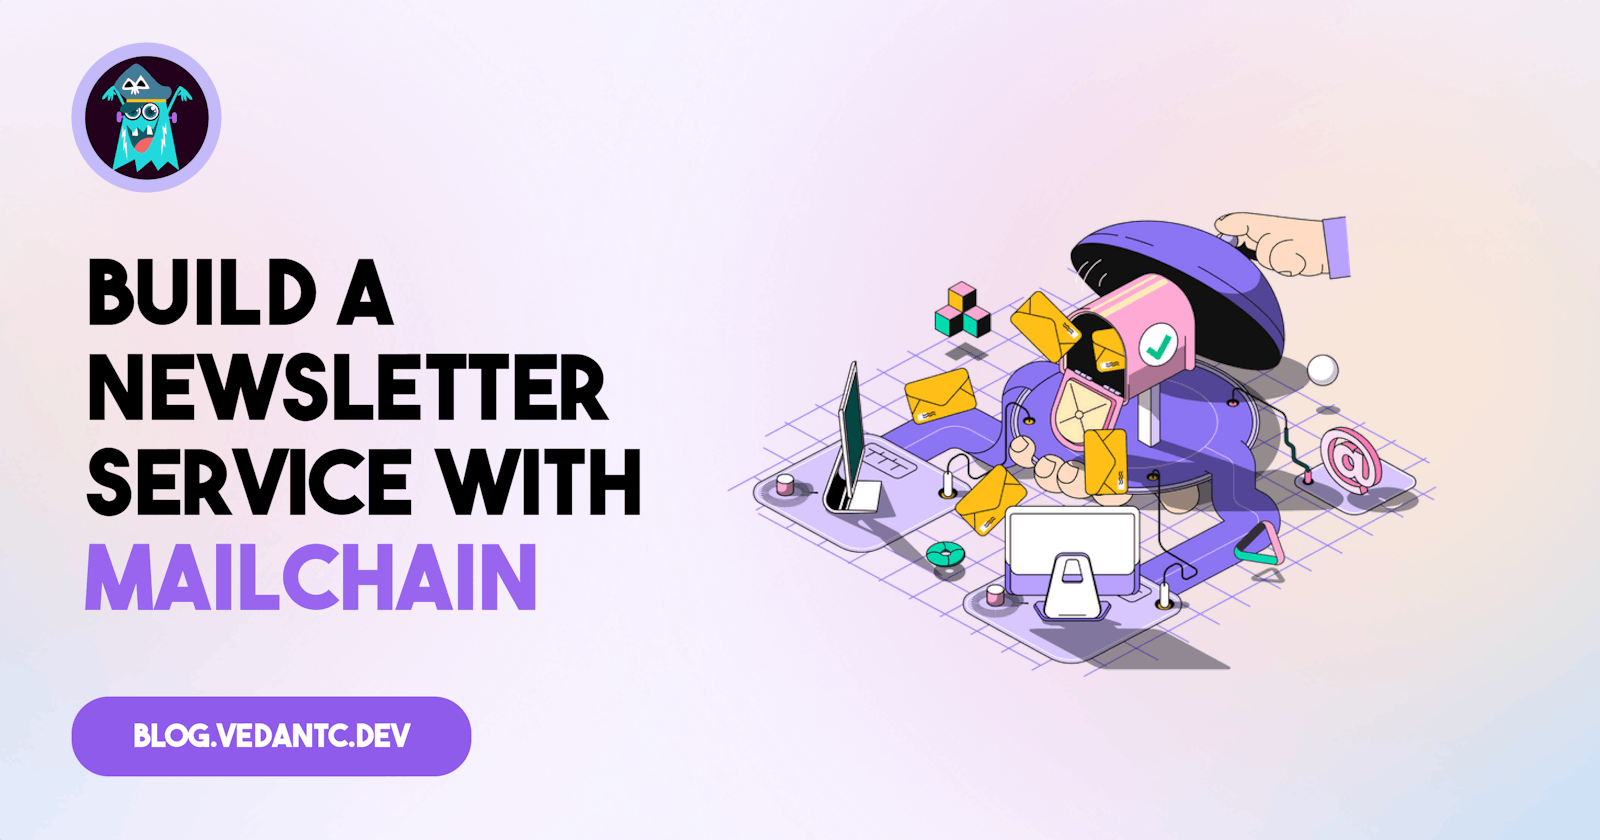 Web3 Newsletter Creation Made Easy with Mailchain: A Step-by-Step Guide